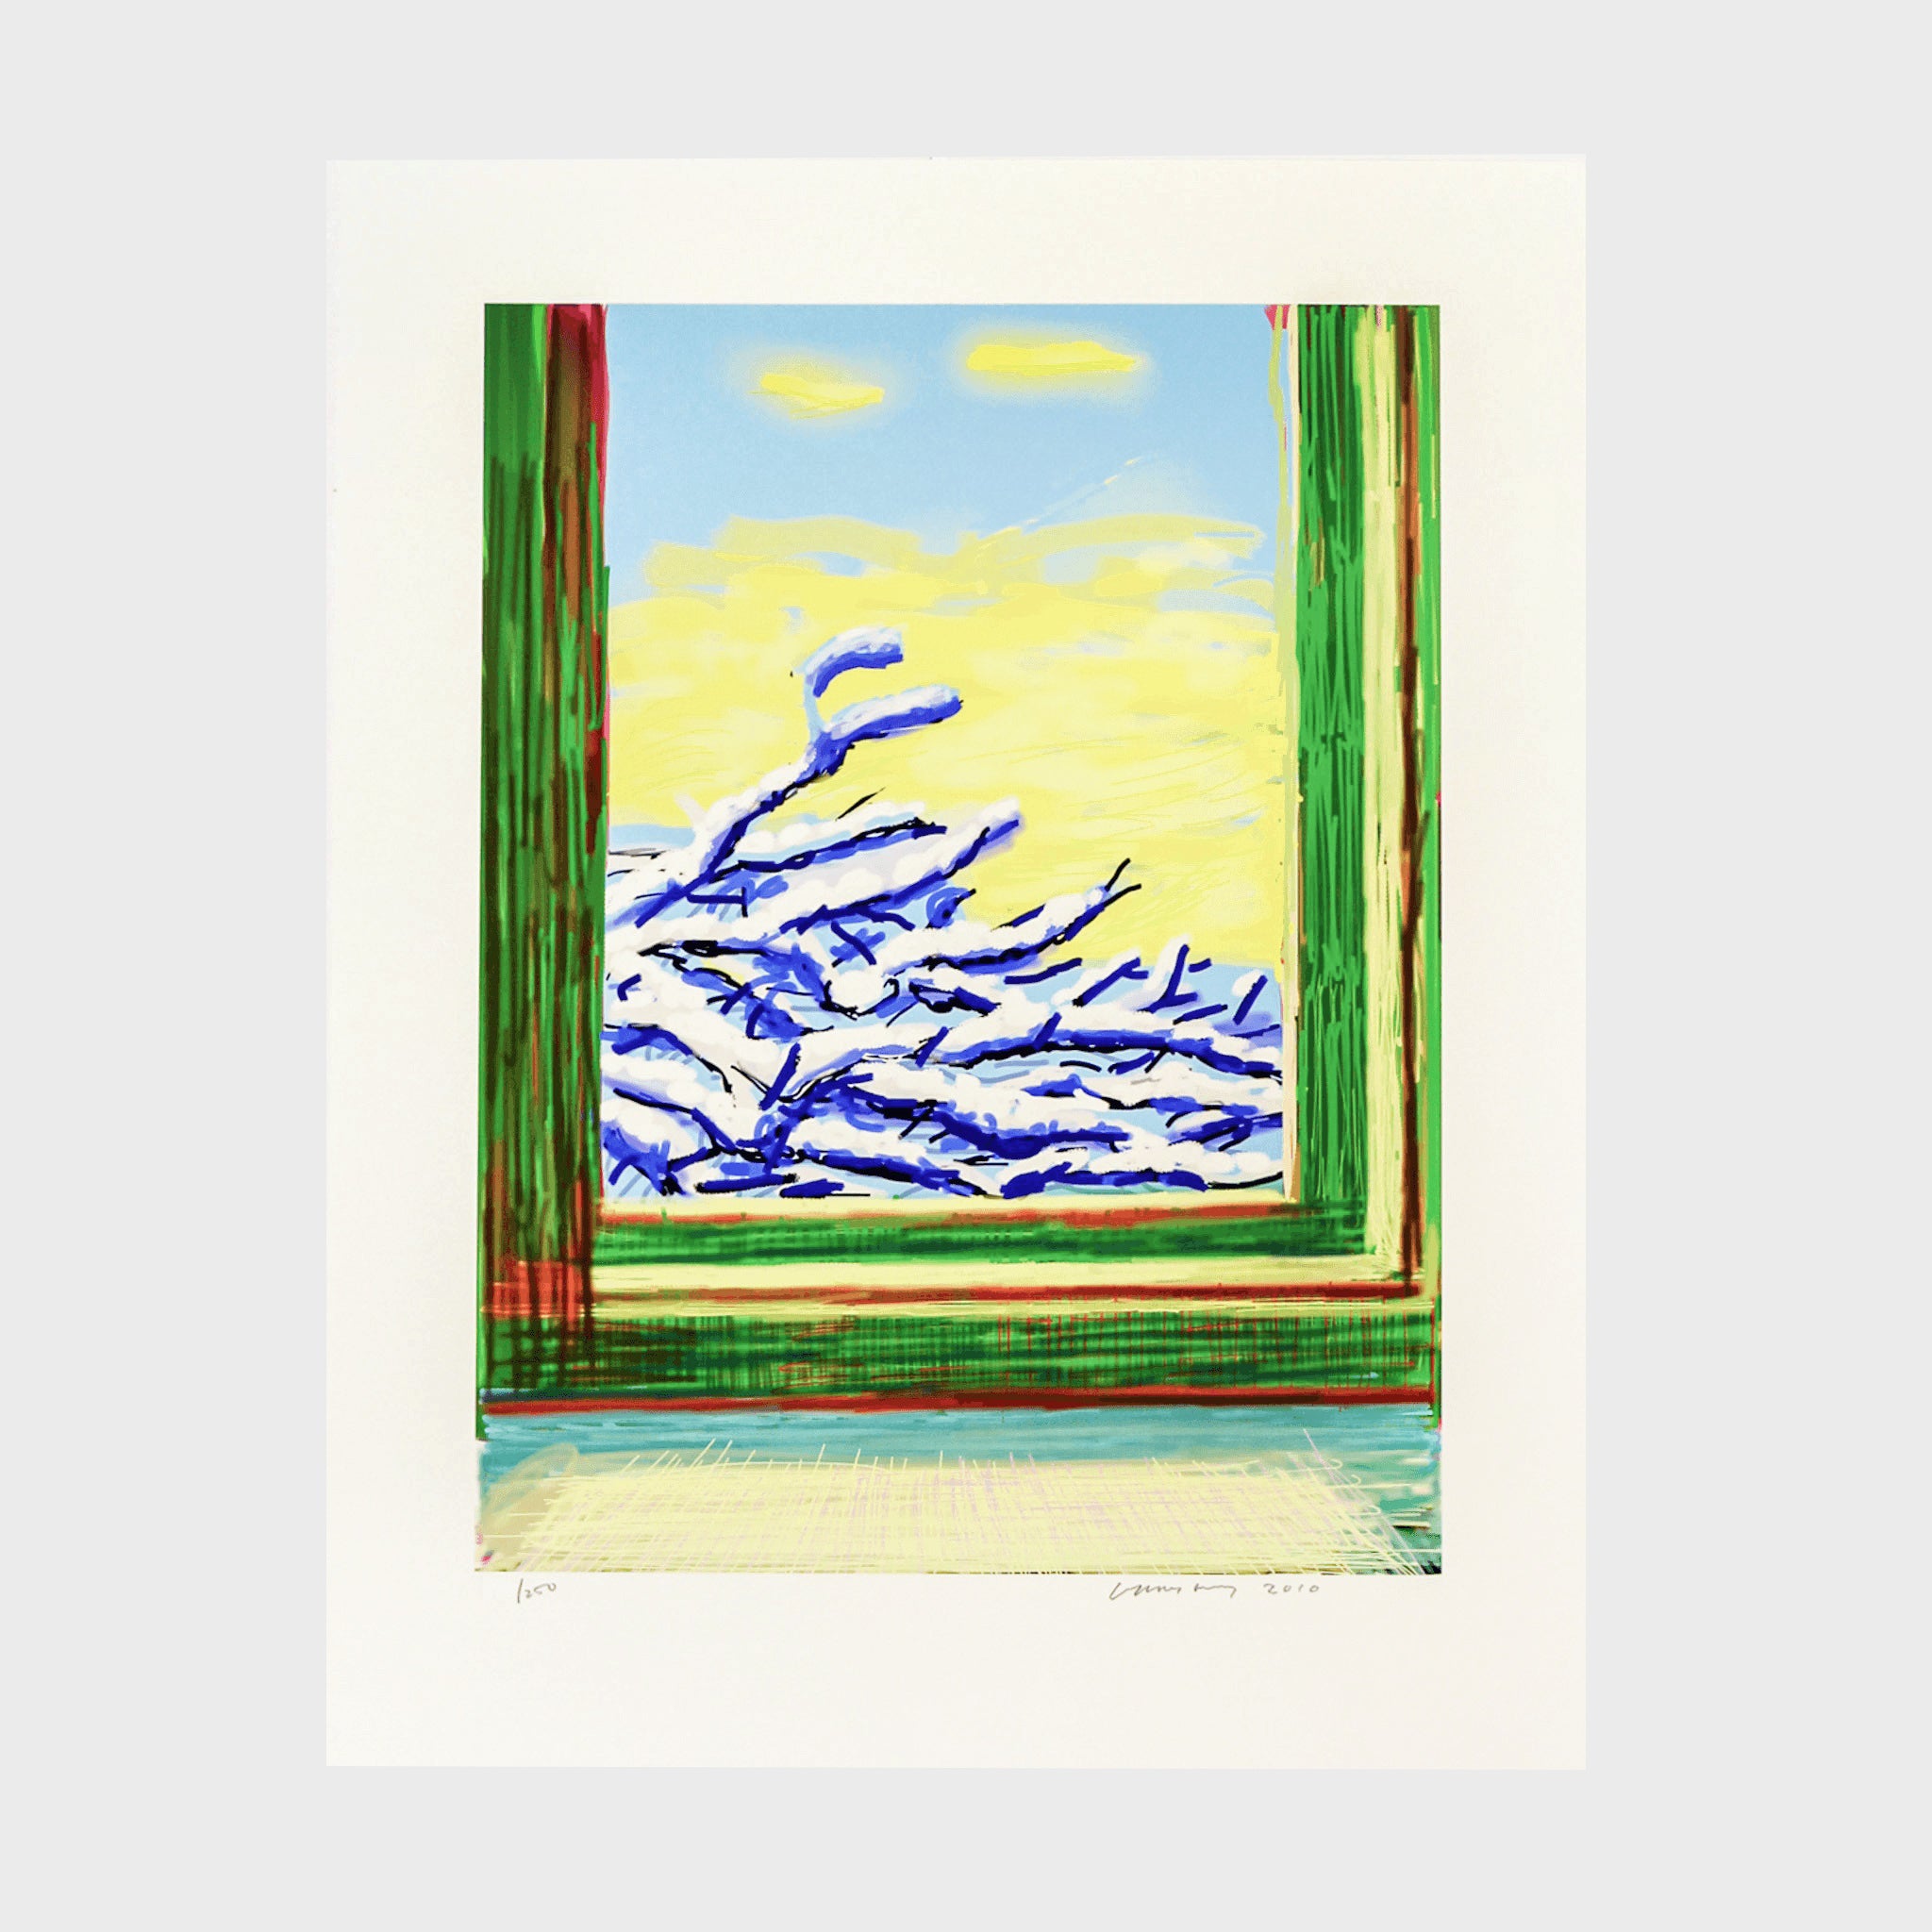 David Hockney, My Window, iPad drawing ‘No. 610', 2019 For Sale | Lougher Contemporary 